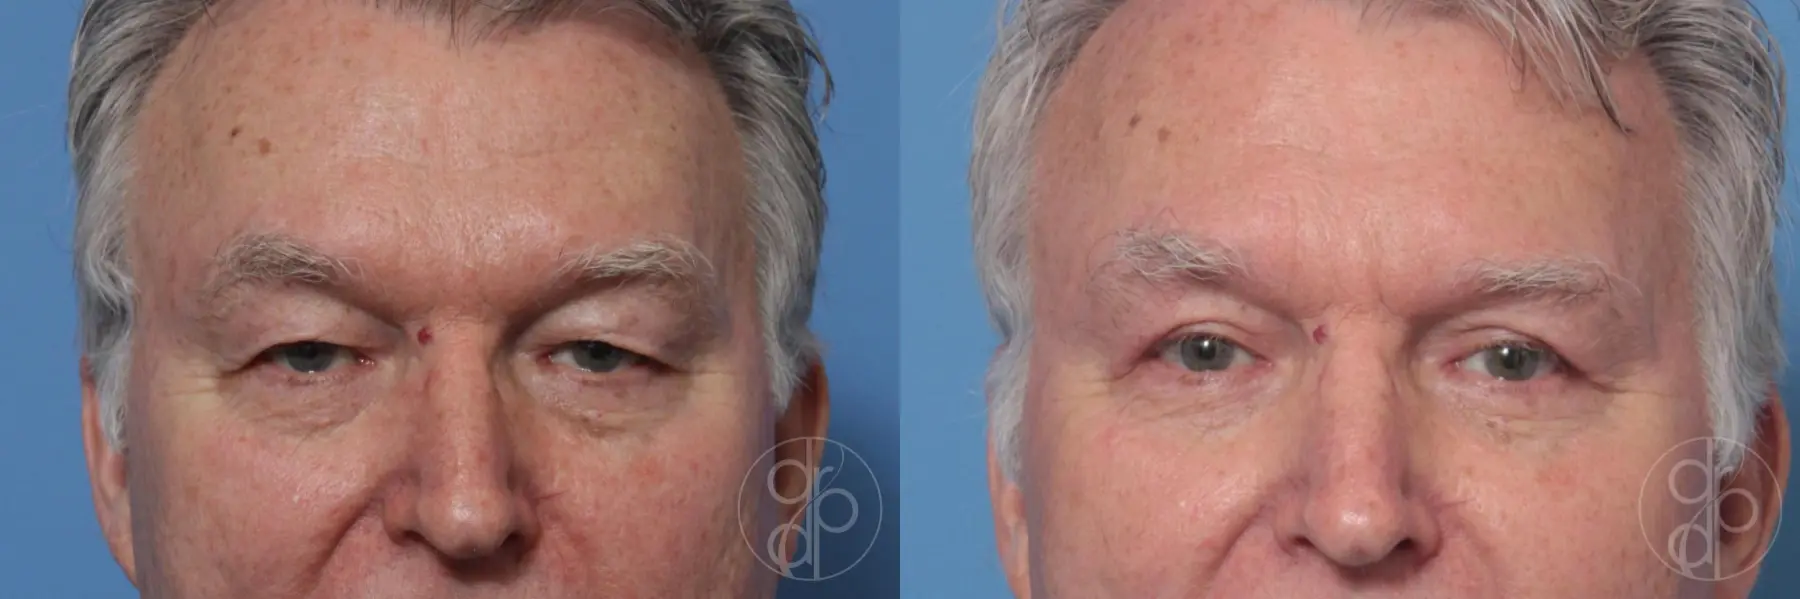 patient 10268 blepharoplasty before and after result - Before and After 1